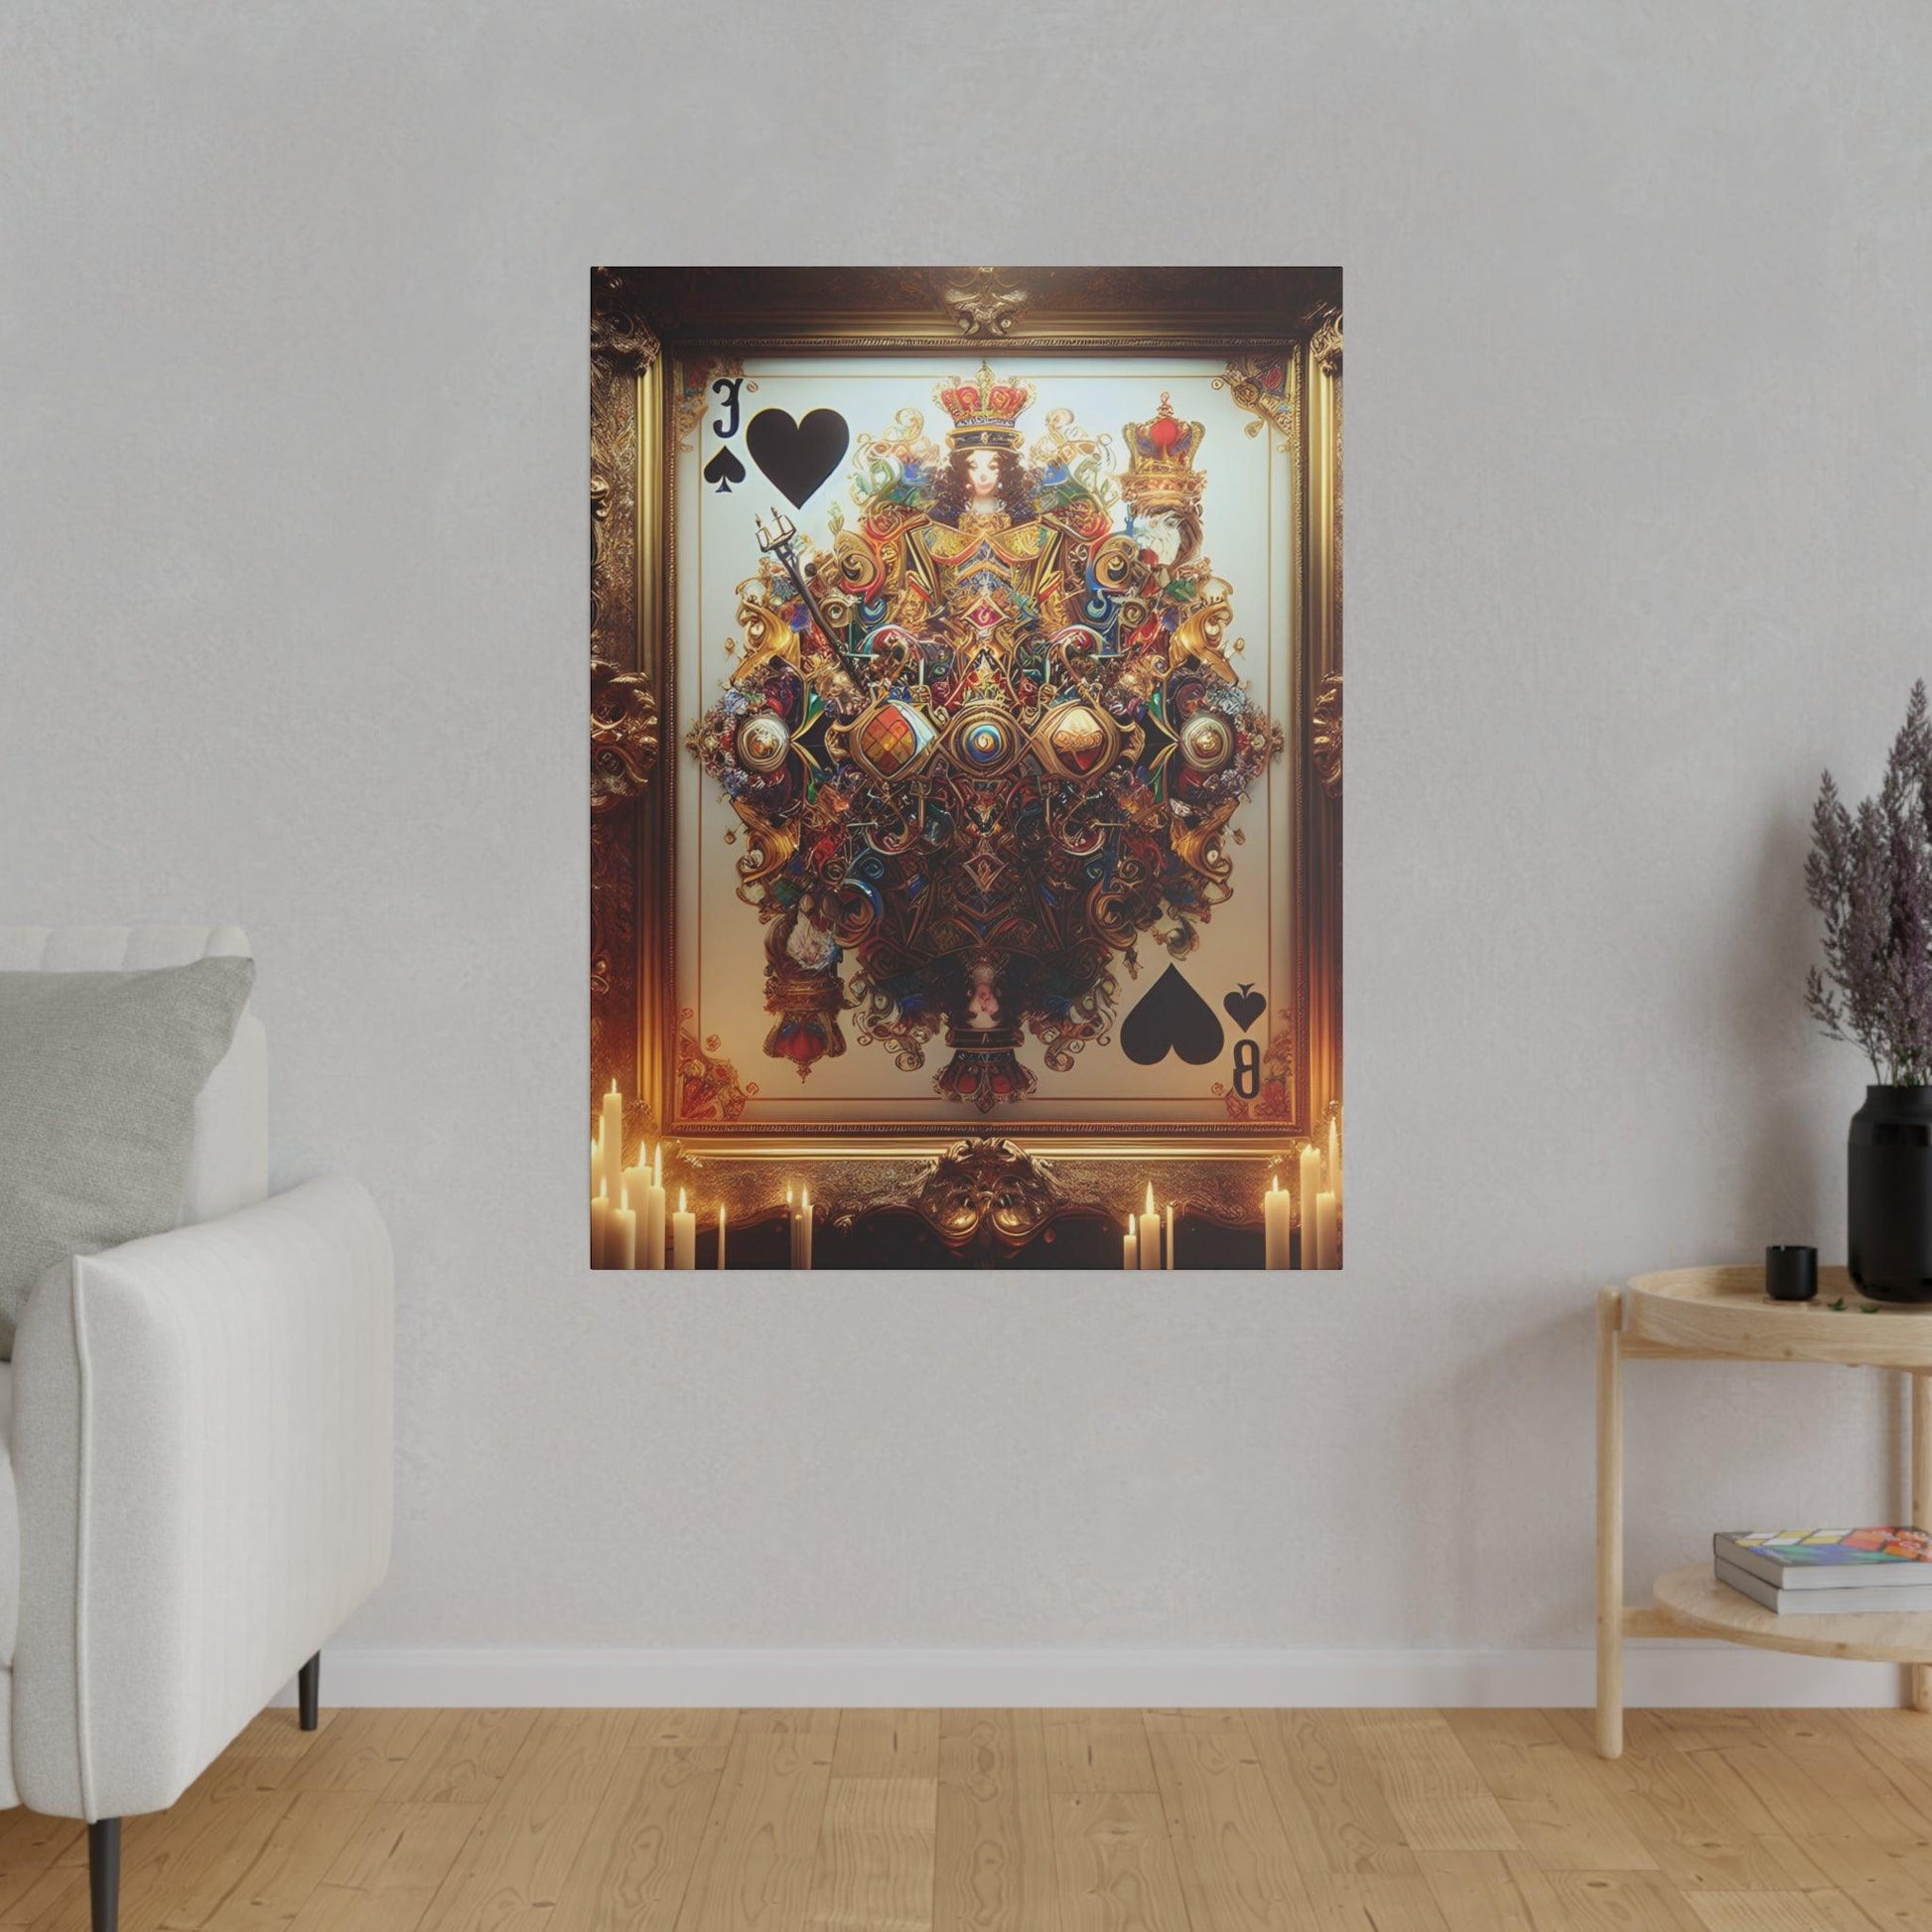 "Deck of Dreams: Playing Card Inspired Canvas Wall Art" - The Alice Gallery